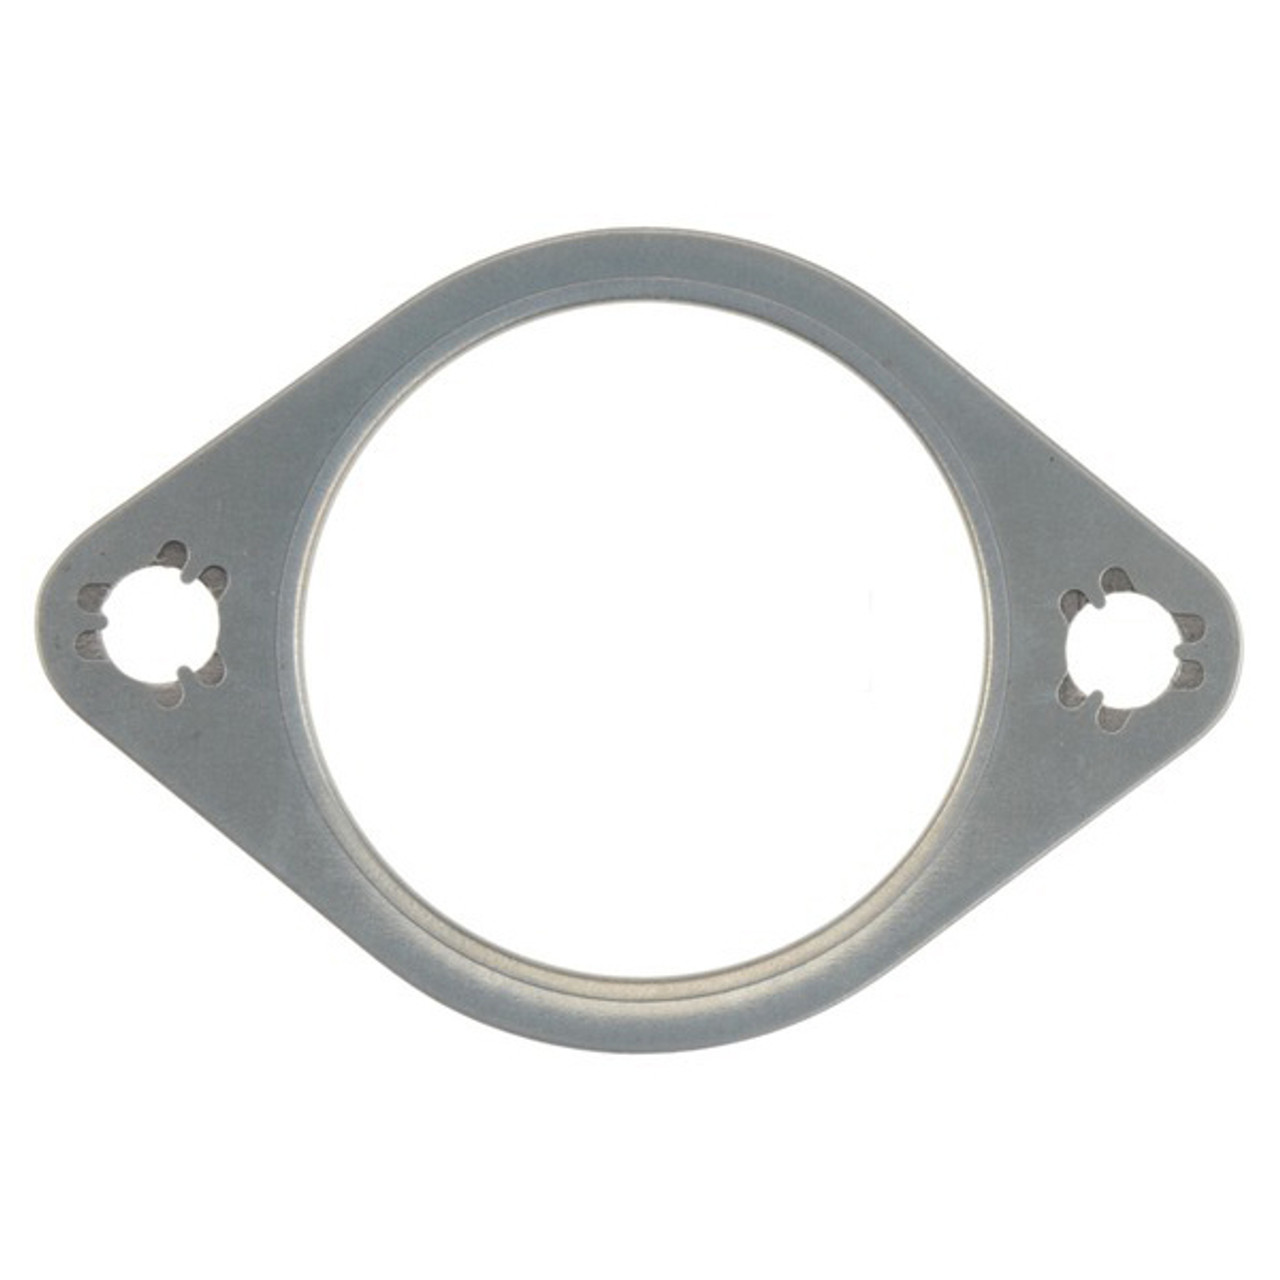 Mahle Exhaust Pipe Flange Gasket 2008 to 2010 6.4L Powerstroke (MCIB32255)-Main View